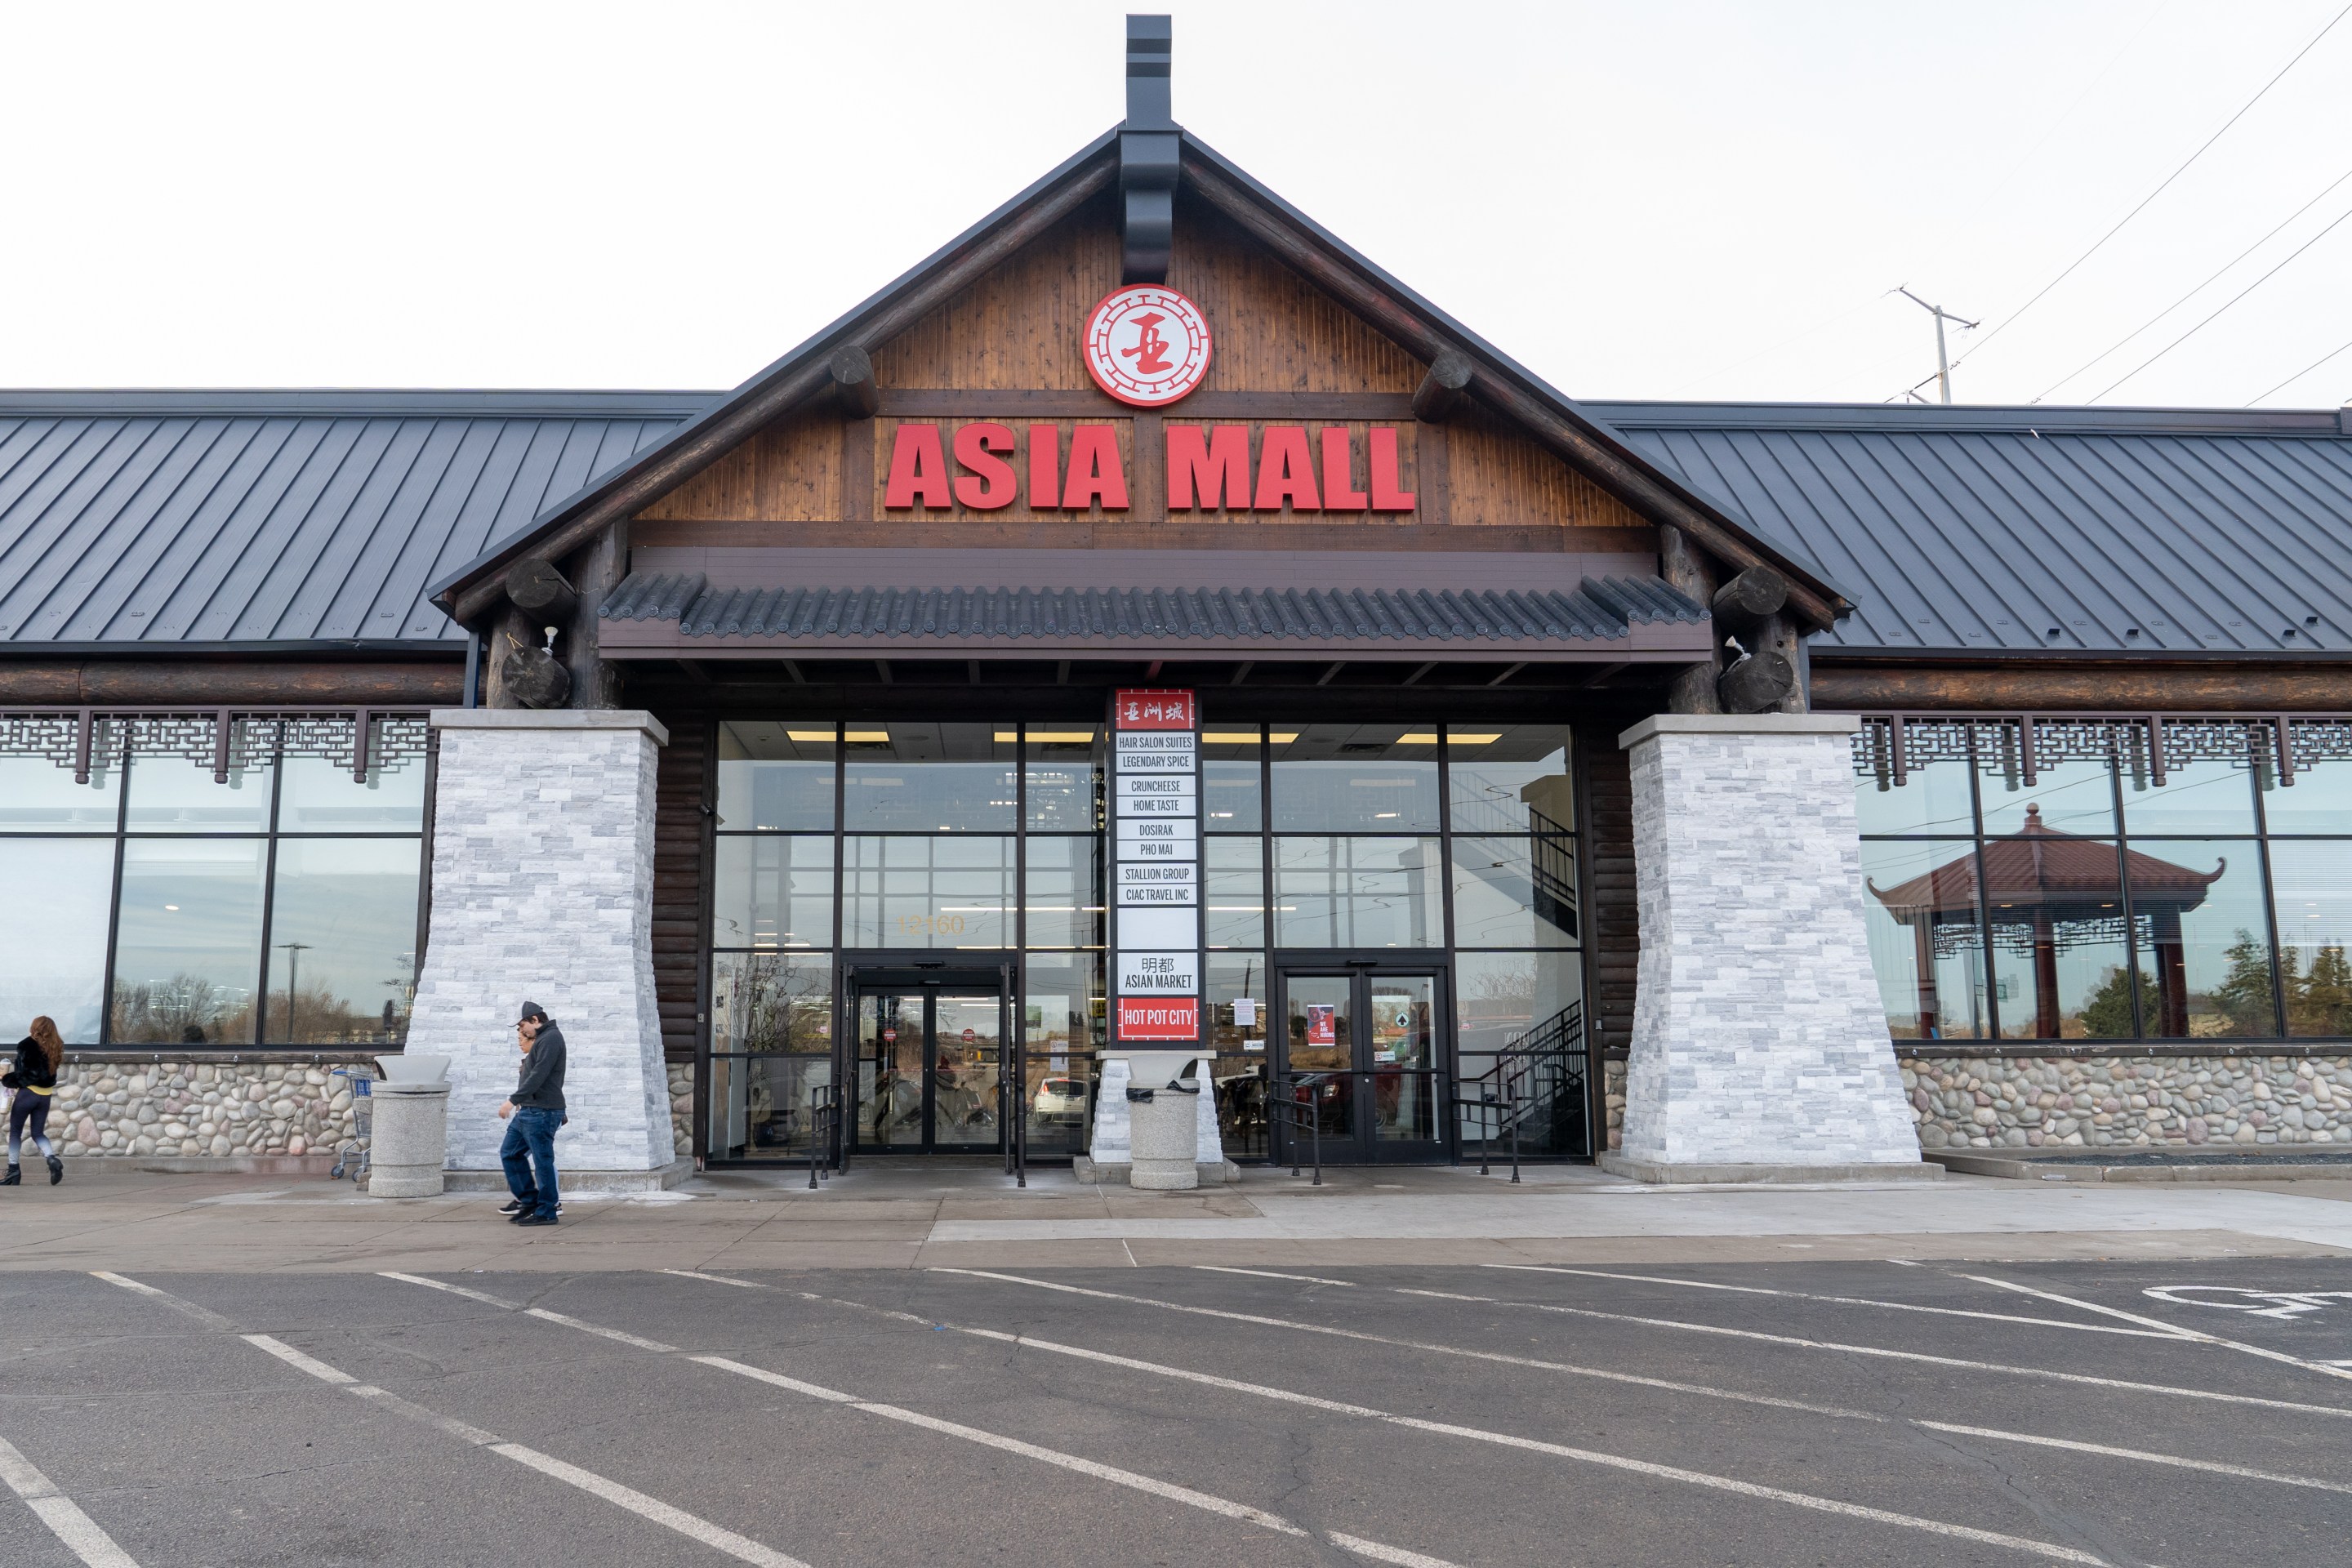 the exterior of asia mall, with a bright red sign